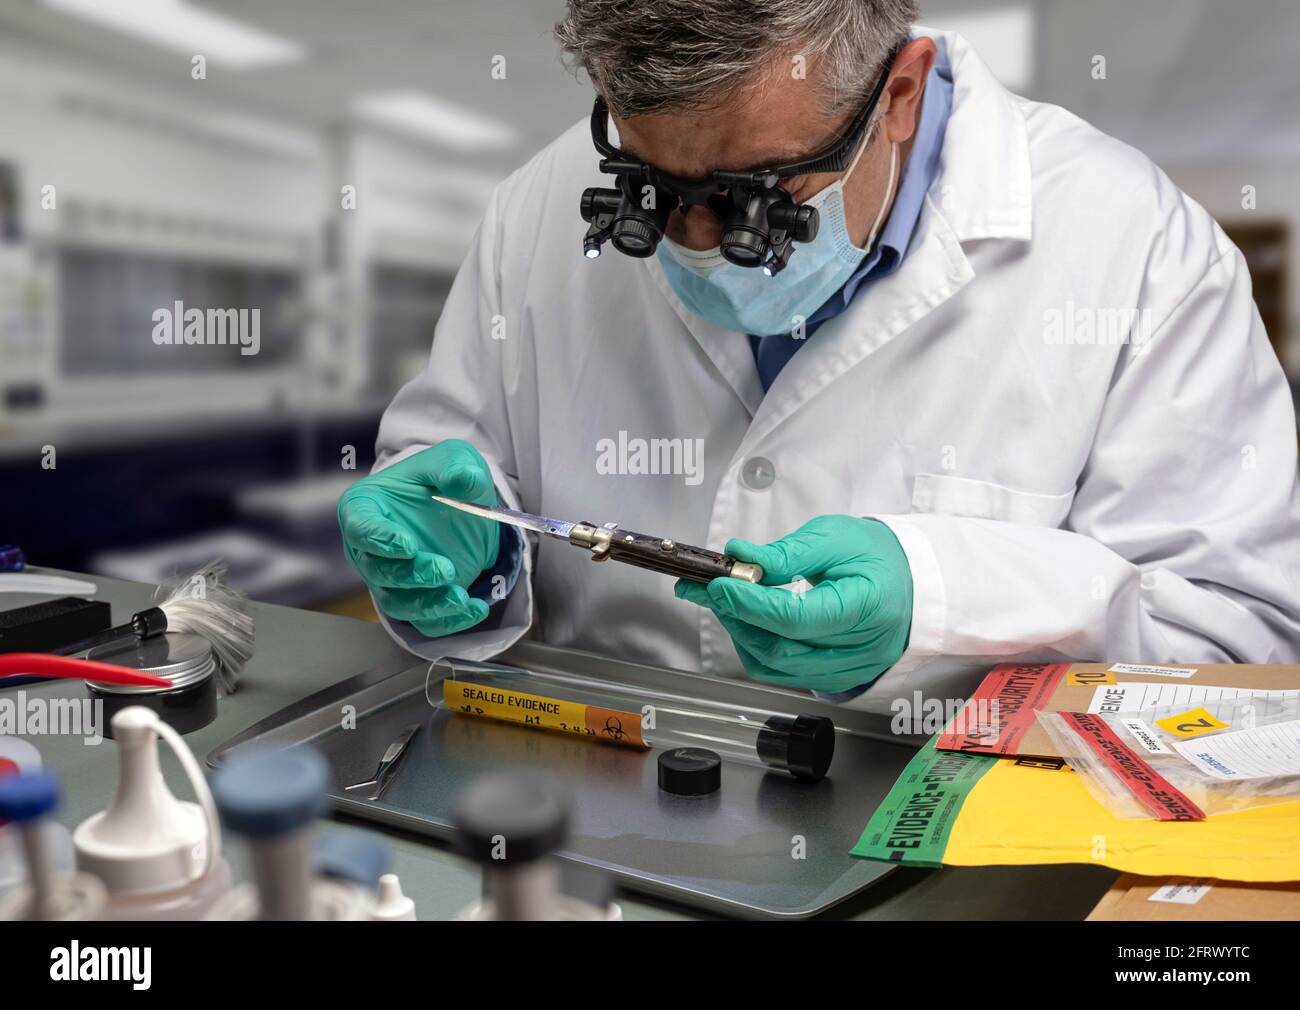 Forensic police analyse knife used in murder at crime lab with magnifying glasses, concept image Stock Photo